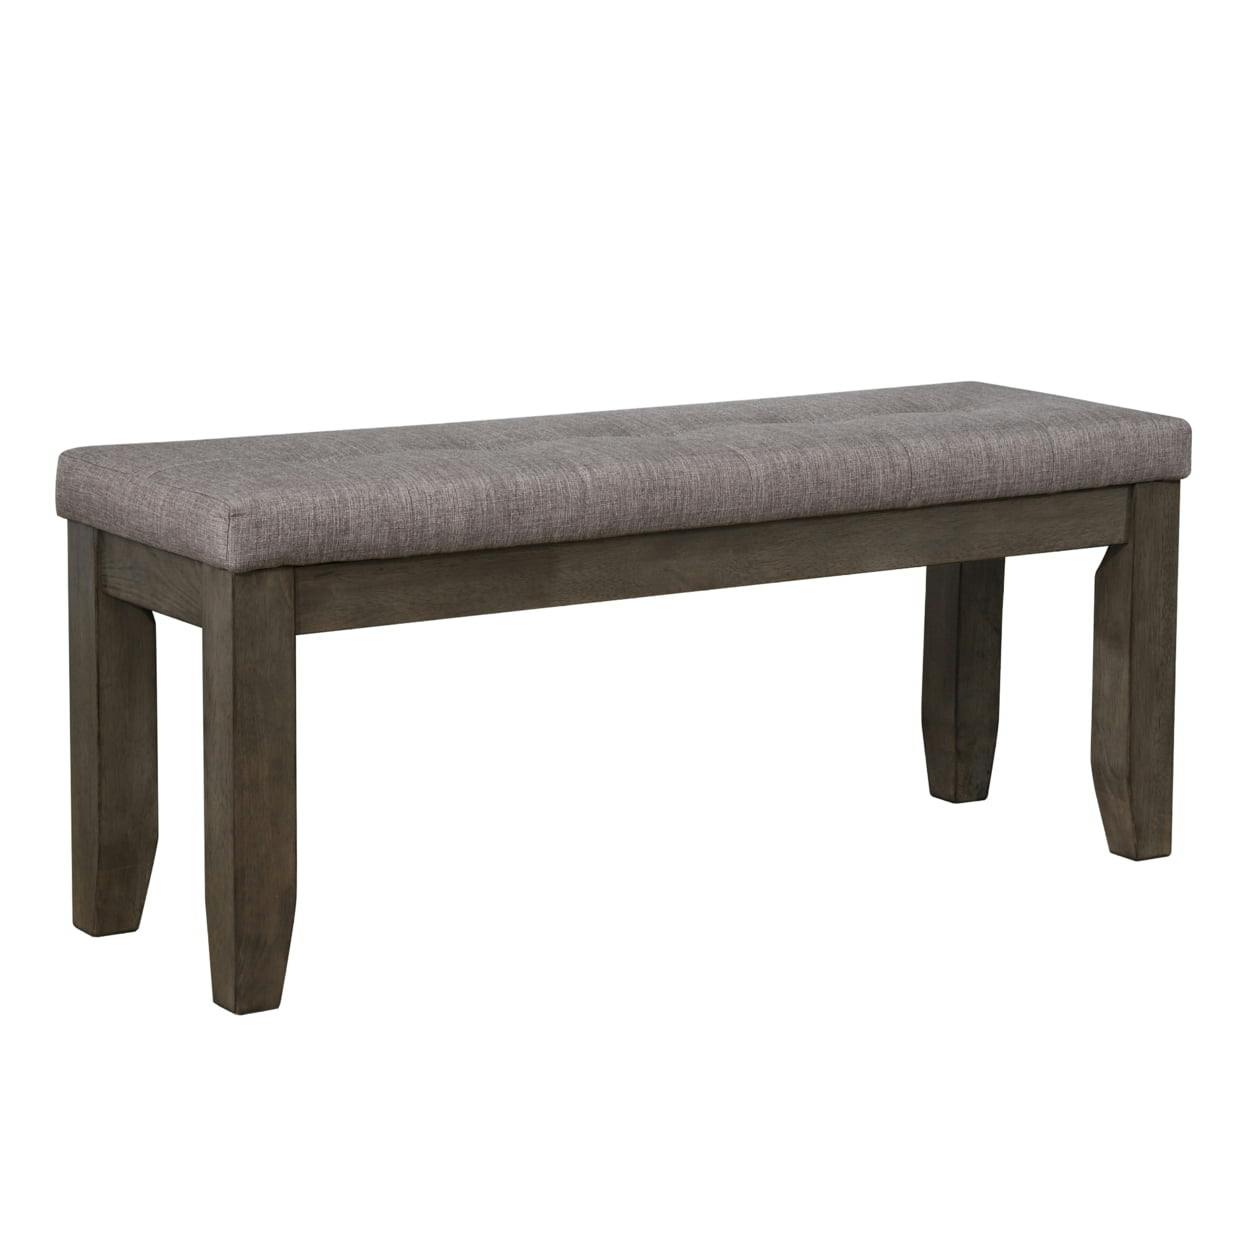 Elegant Dual-Tone Wood and Fabric Bench, Brown & Gray, 48"